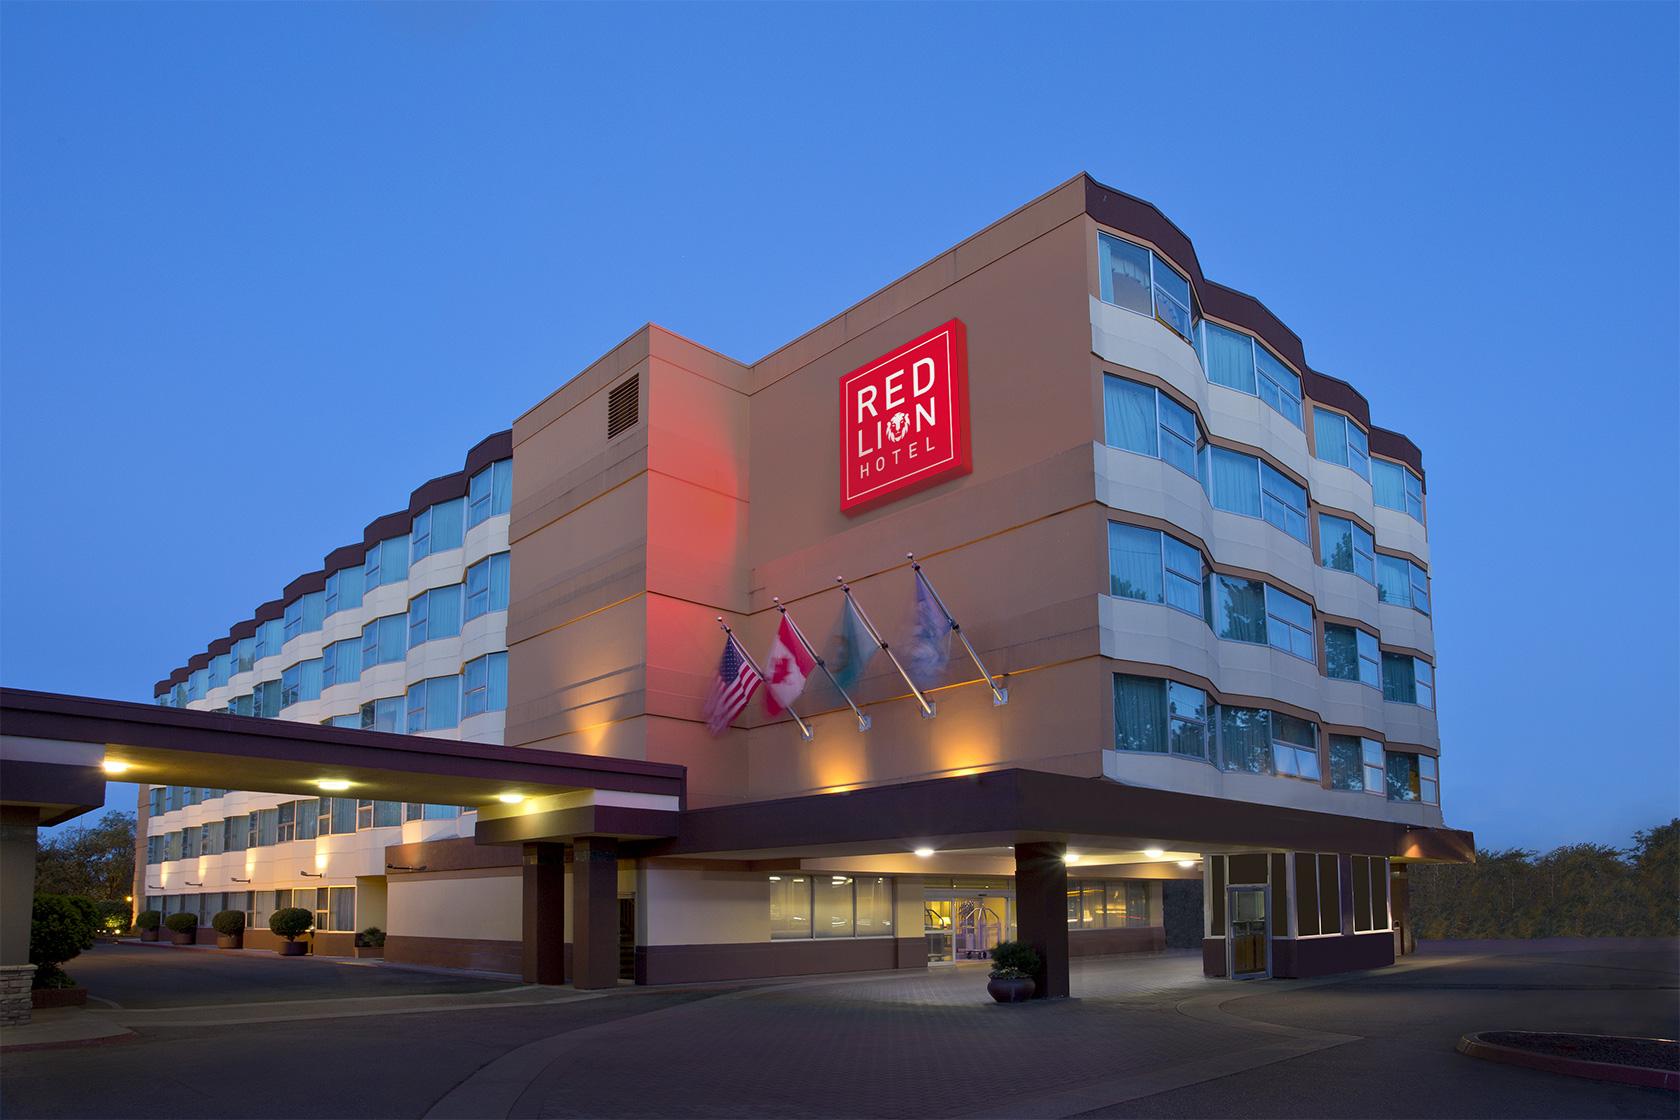 Hotel exterior at dusk with entrance to lobby, flags, and red sign